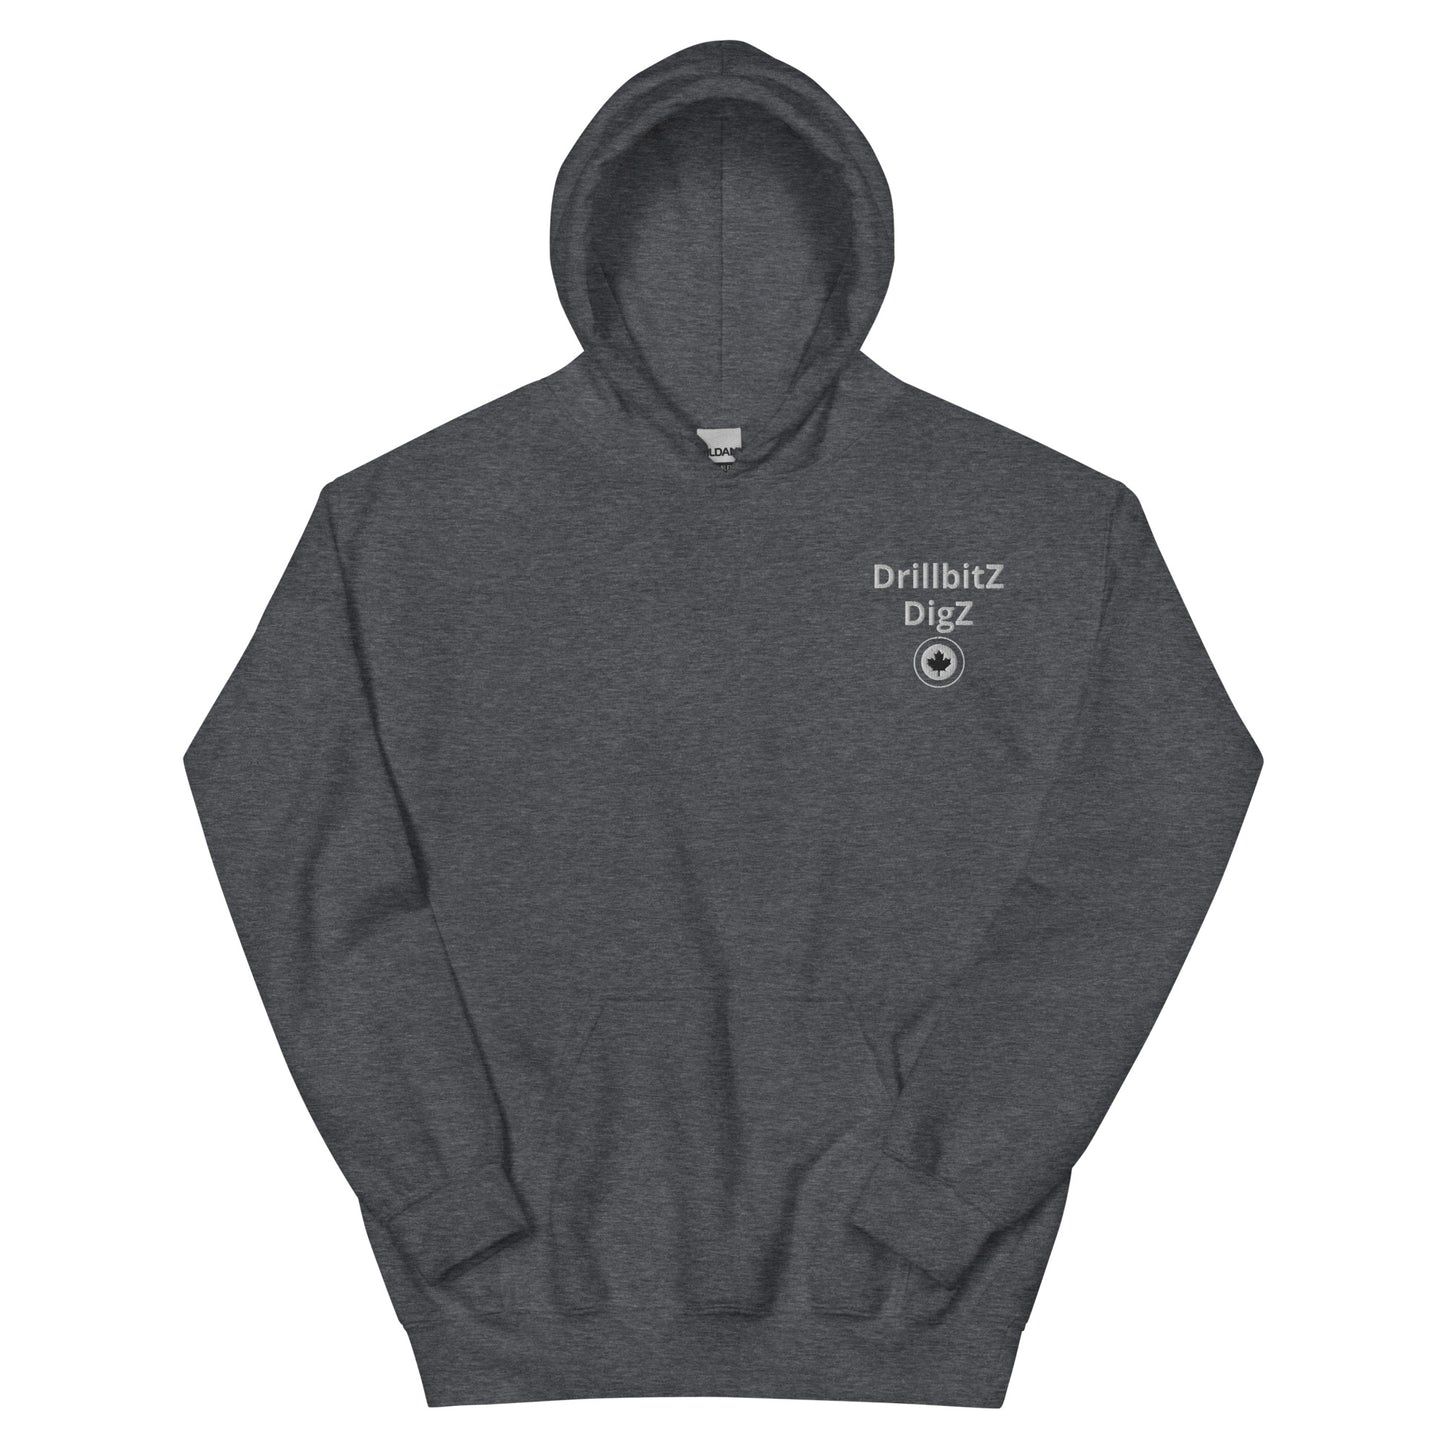 I SUPPORT CANADIAN FORRESTRY Unisex Hoodie